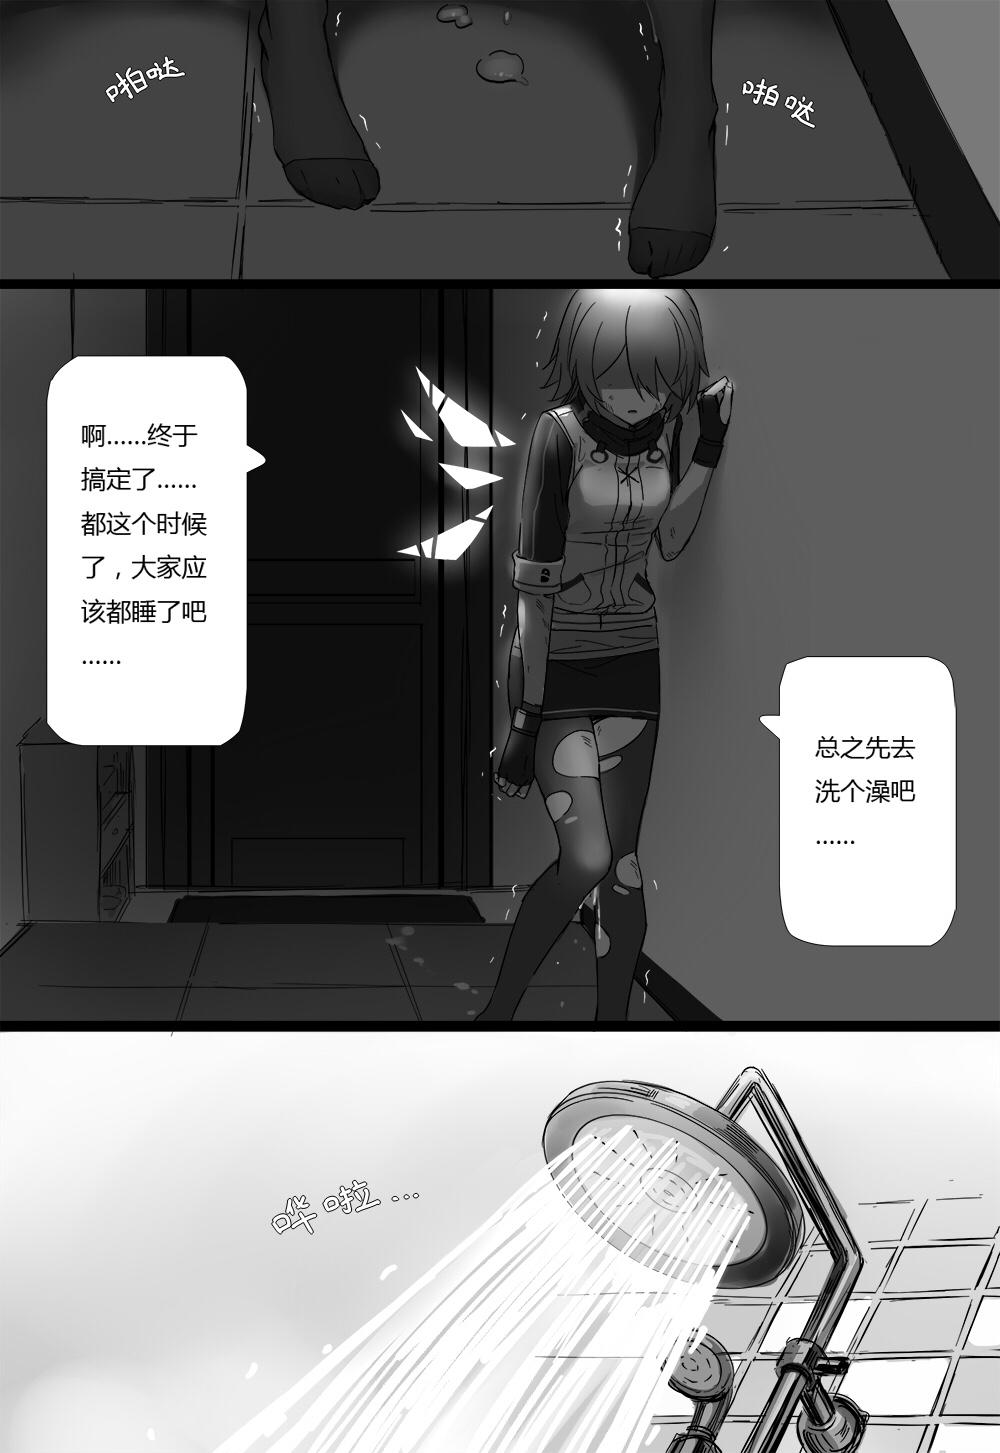 Tranny Sex 无能狂怒 - Arknights Thick - Page 13